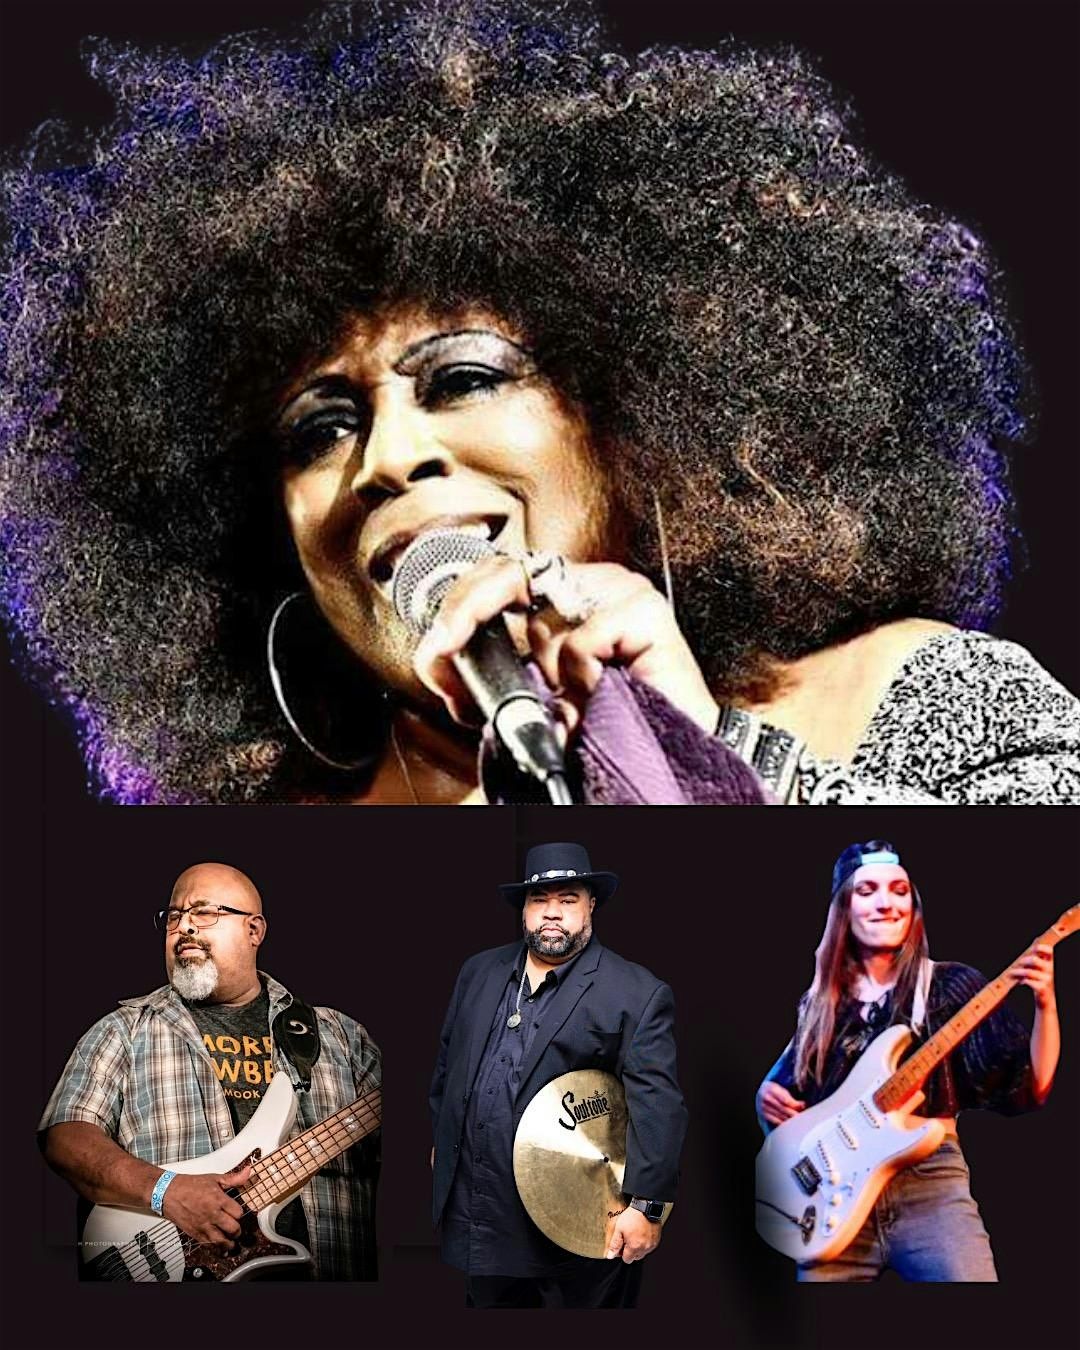 A Night of Blues Featuring Seattle's own LADY A